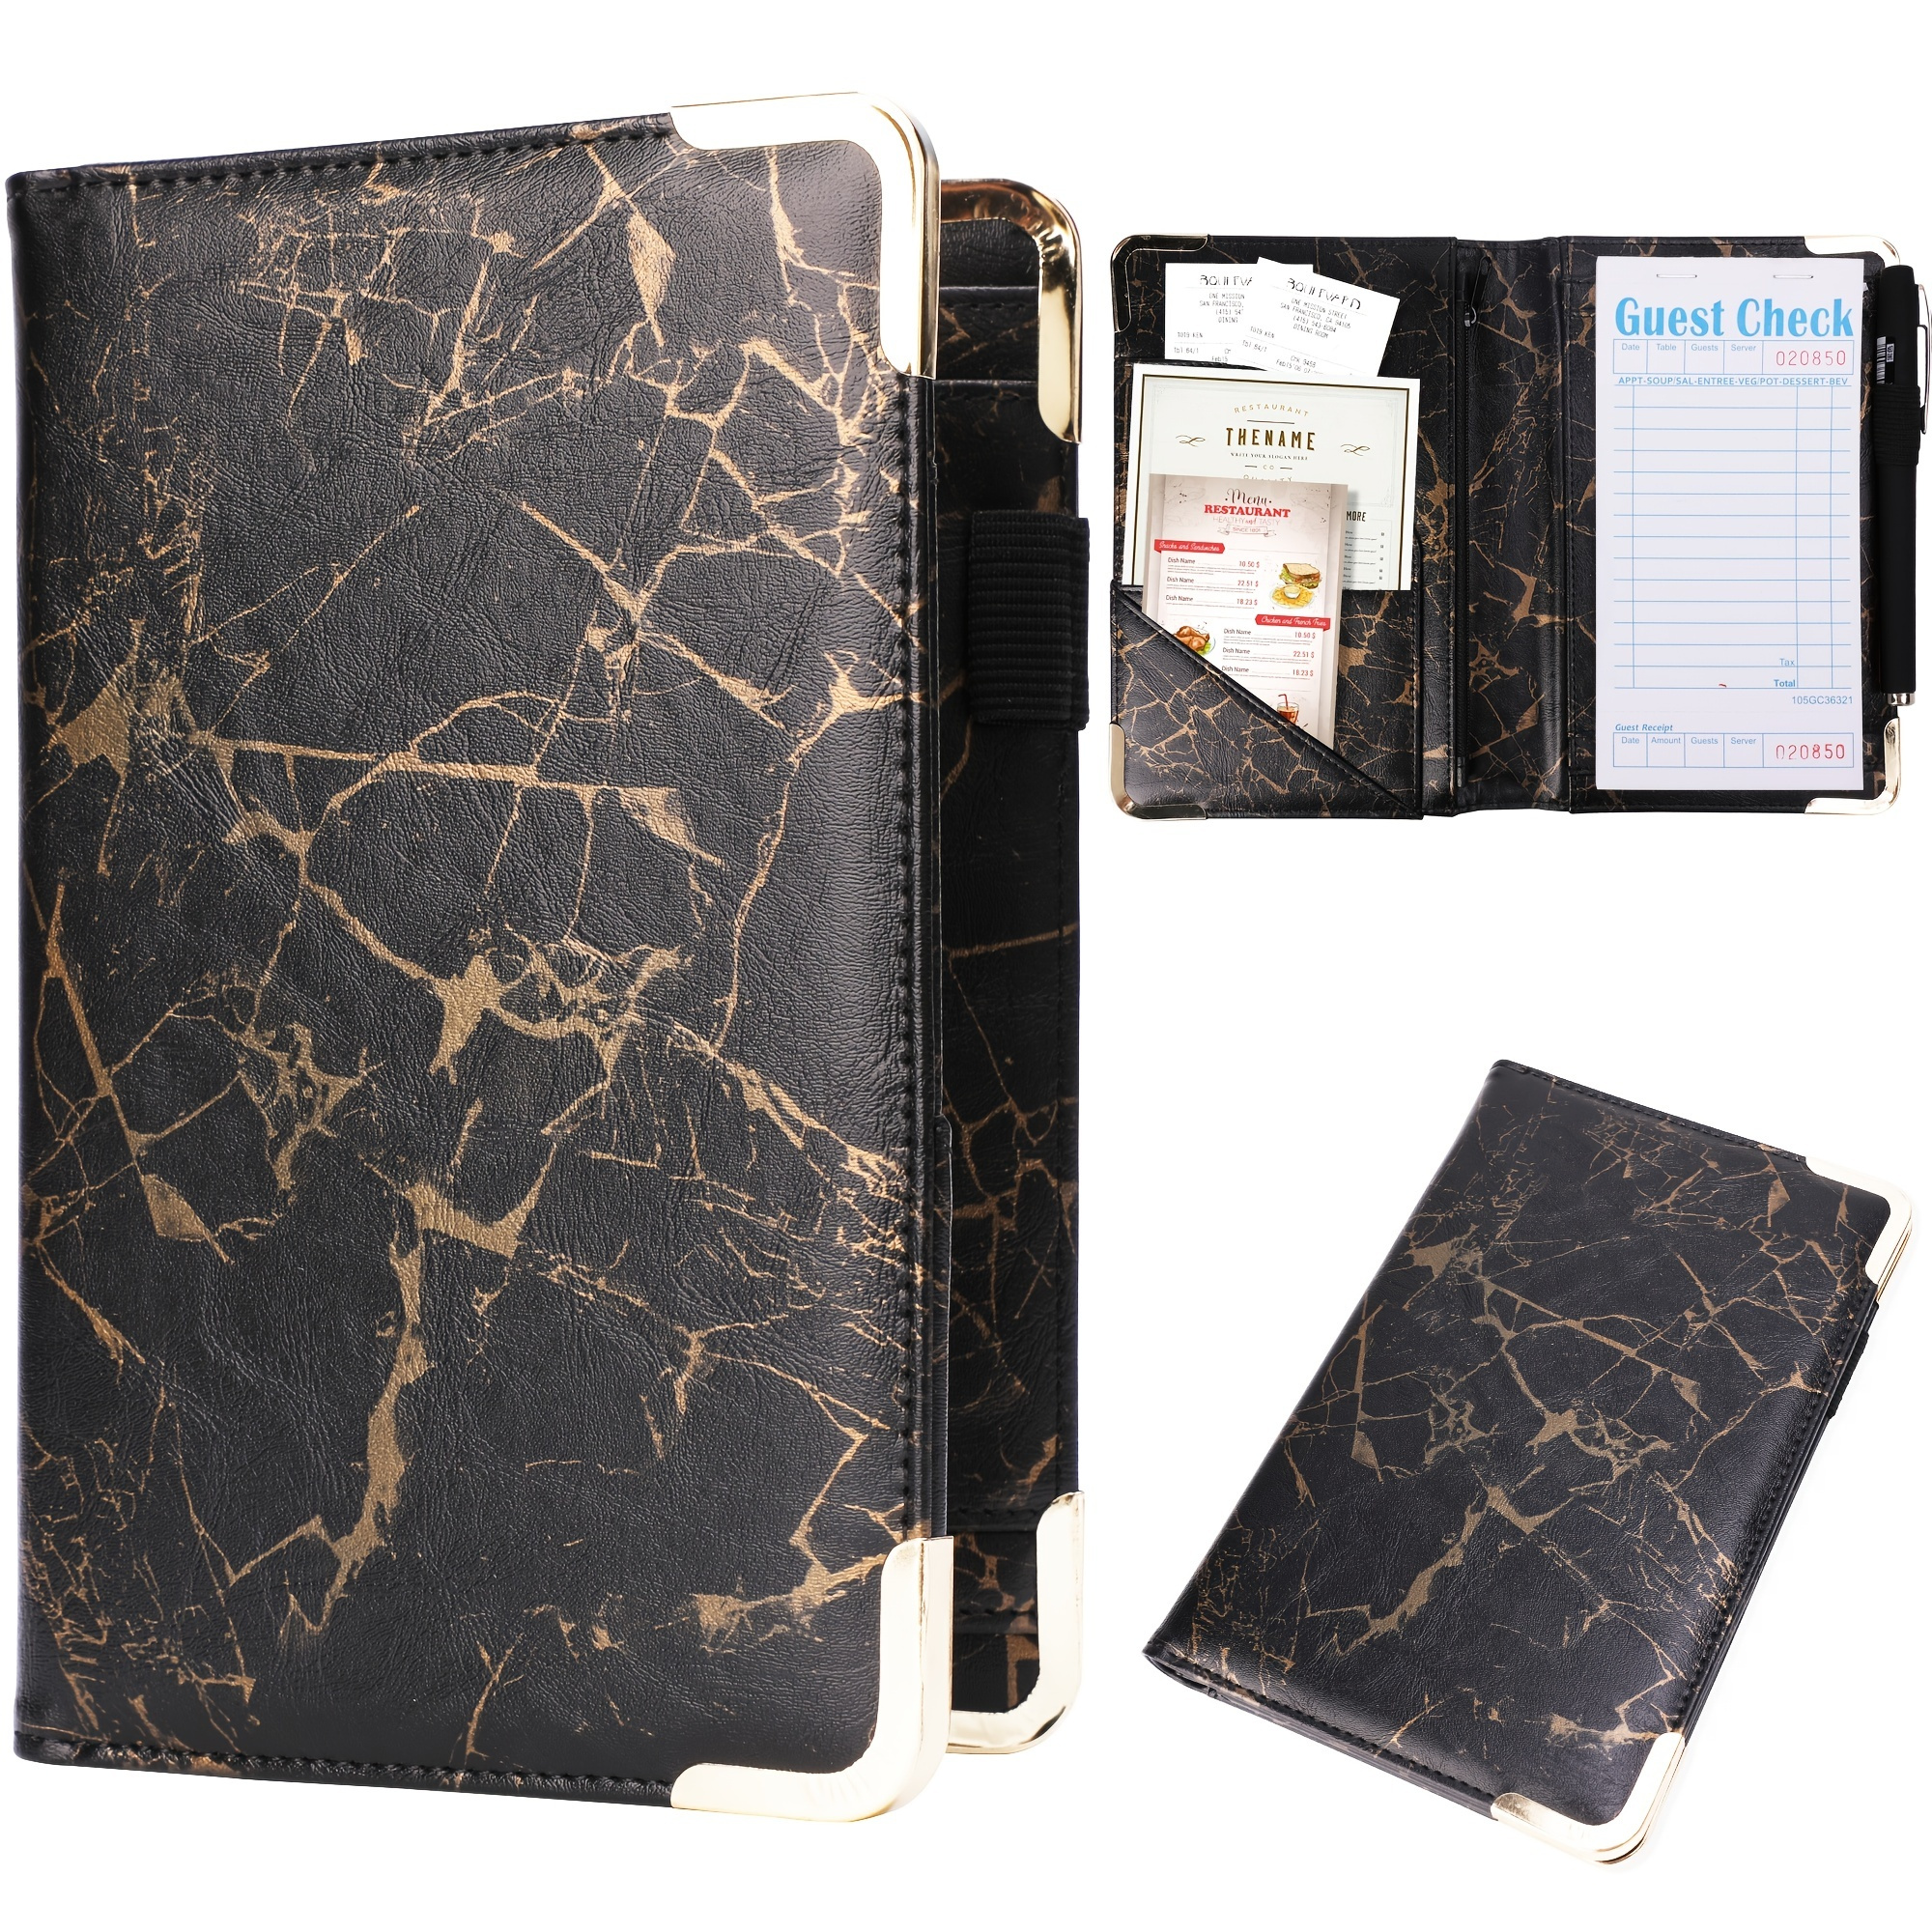 Waitress Server Book Wallet Organizer - Black -Bundled with Wine Opener - Waiter Pad for Restaurant Waitstaff - Fits Apron and Holds Receipts Money